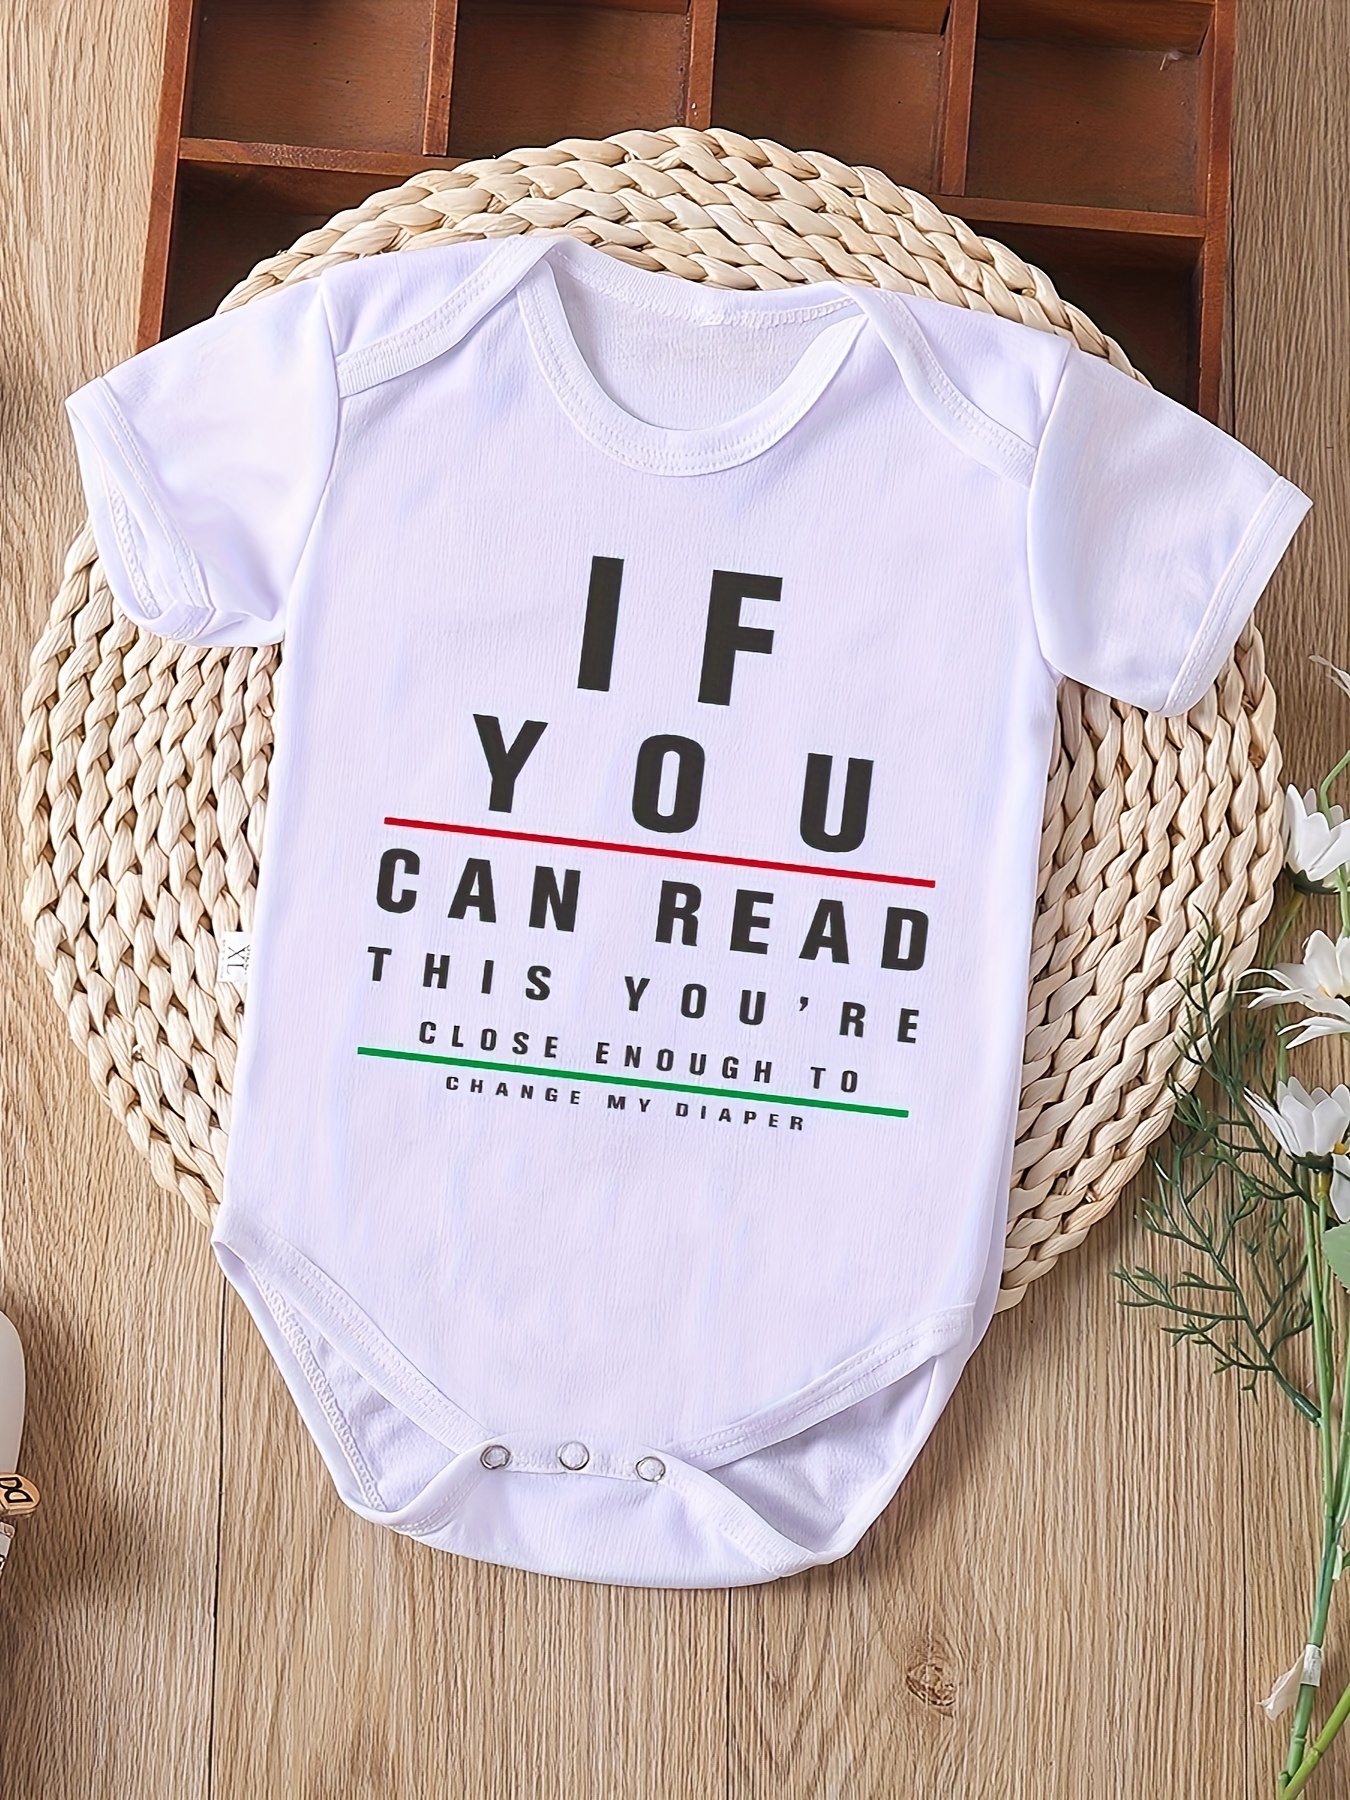 Buy Miyanuby Baby Boys Clothes Set, Summer Baby Short Sleeve Cotton T-Shirt  +Striped Dungarees Outfits for 6Months - 4 Years Old Online at  desertcartKUWAIT